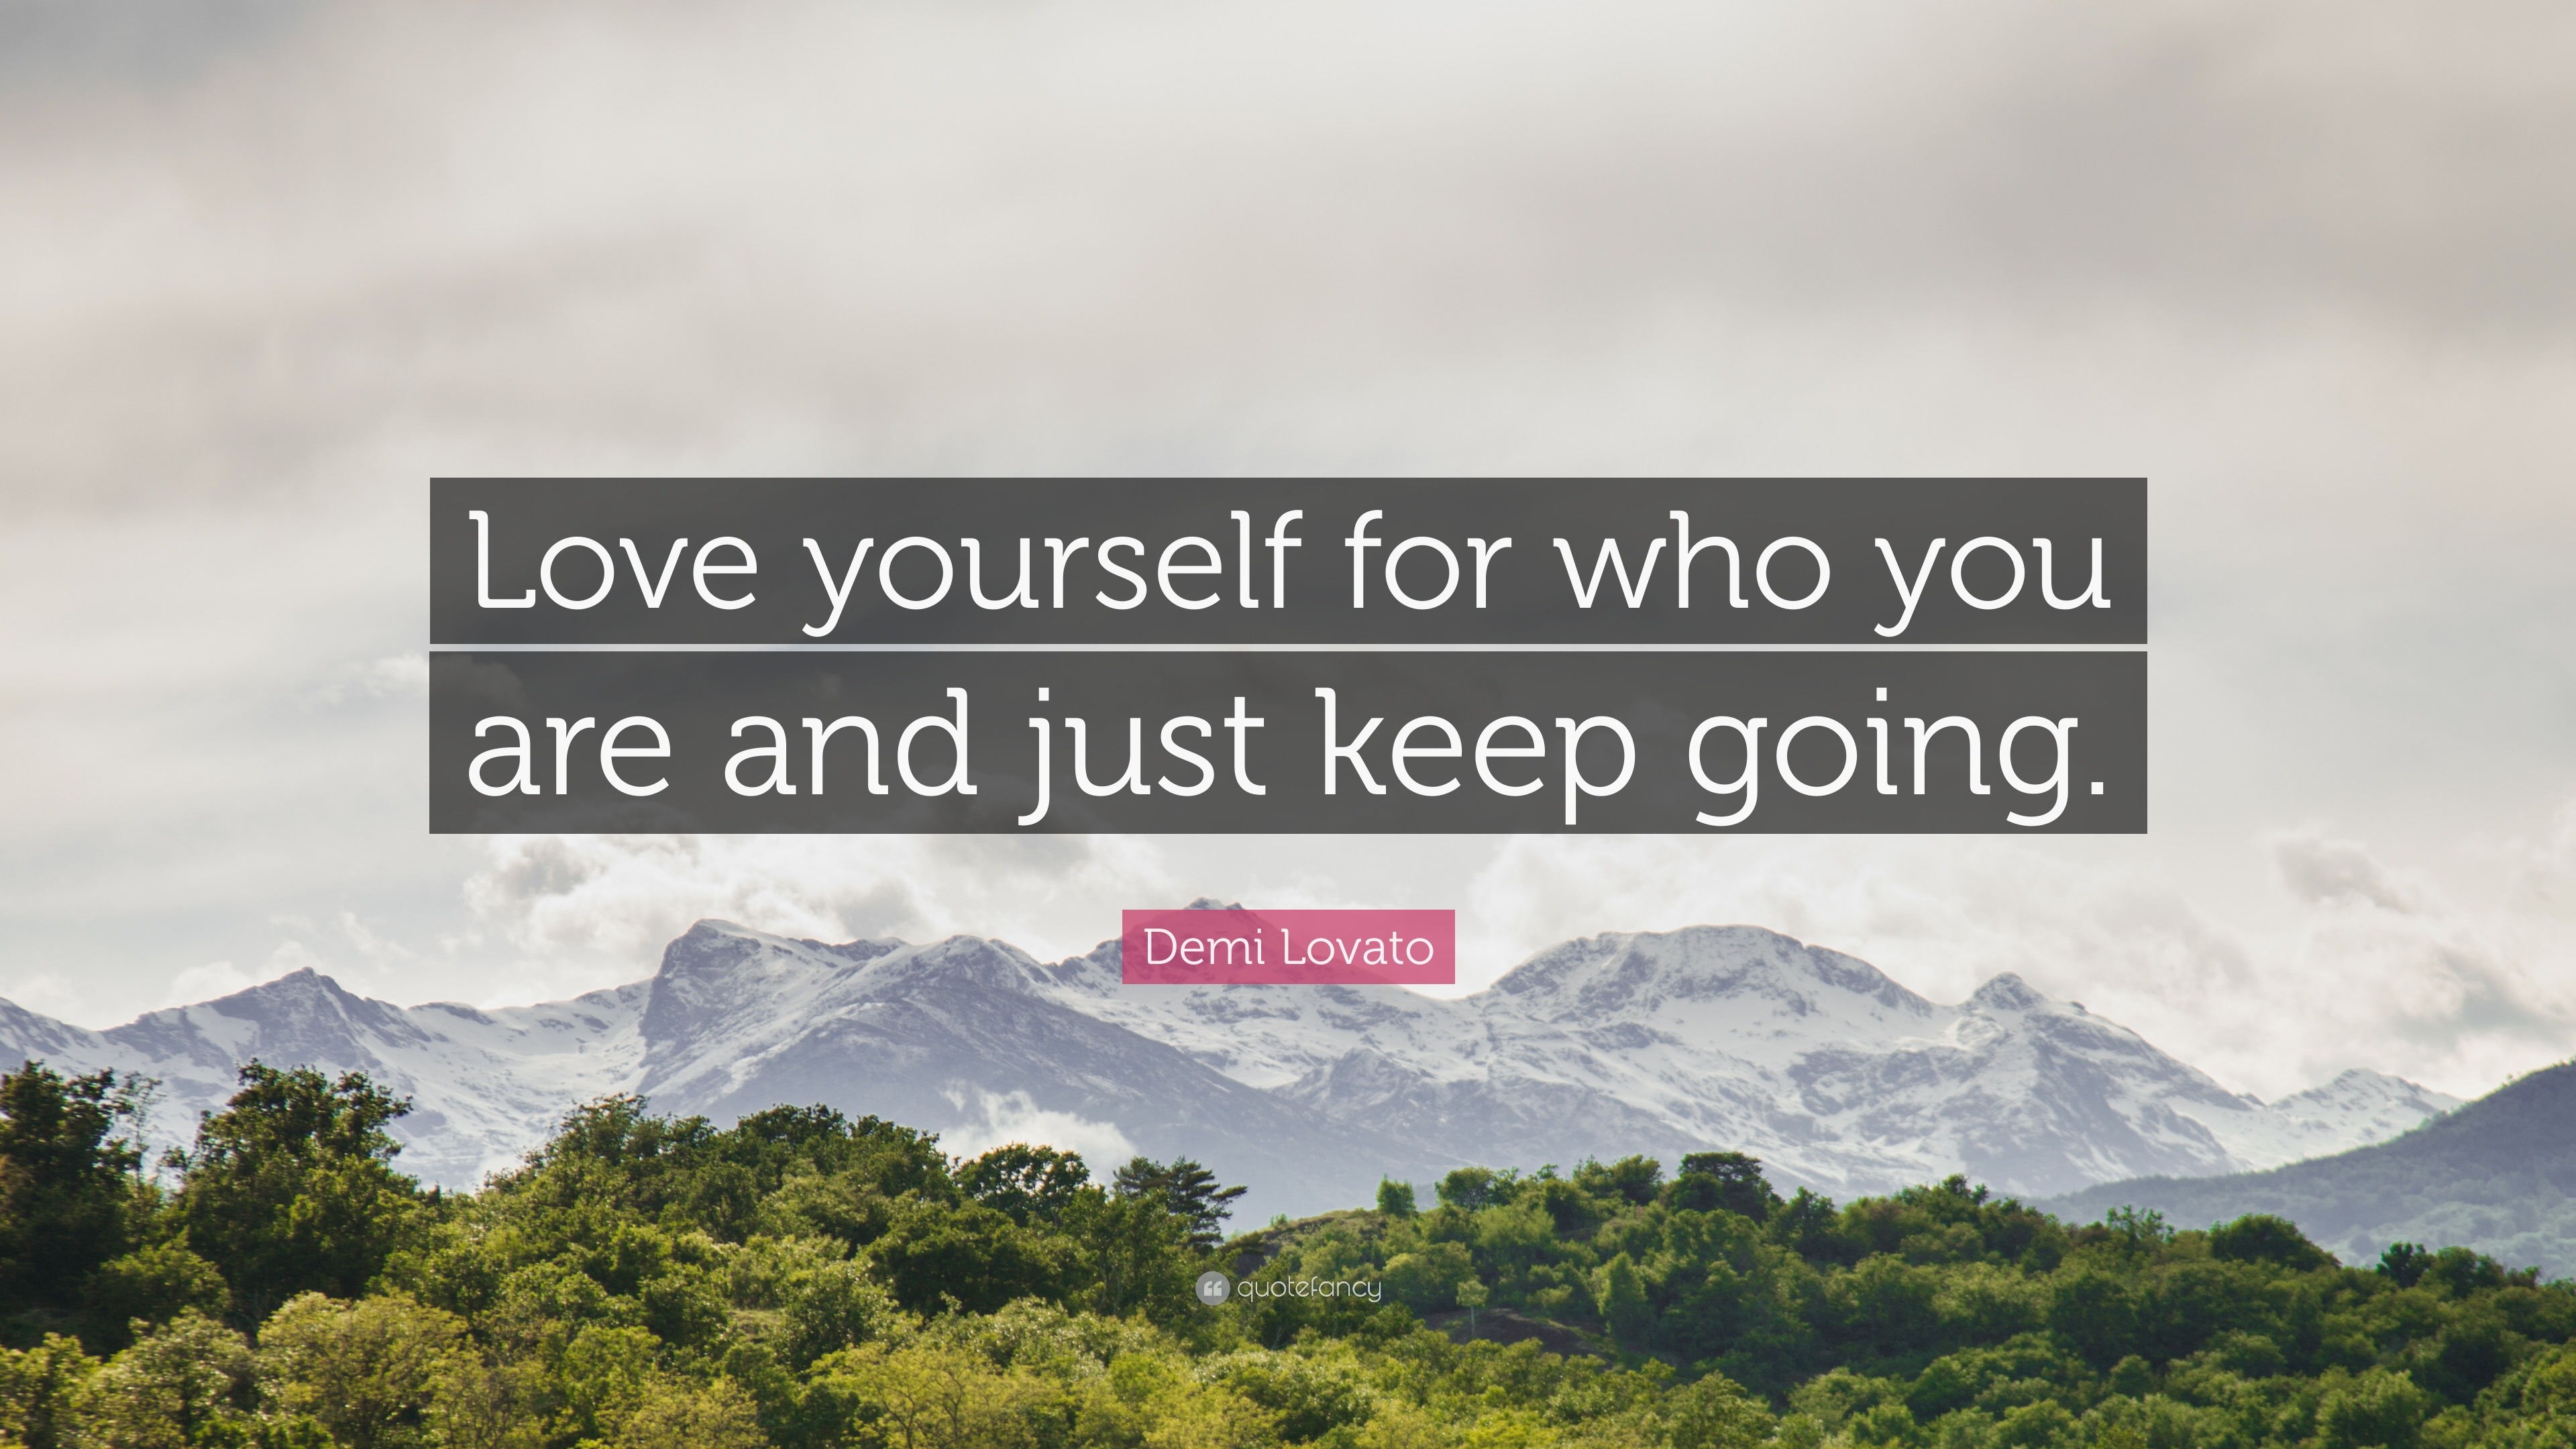 Love You Quotes “Love yourself for who you are and just keep going